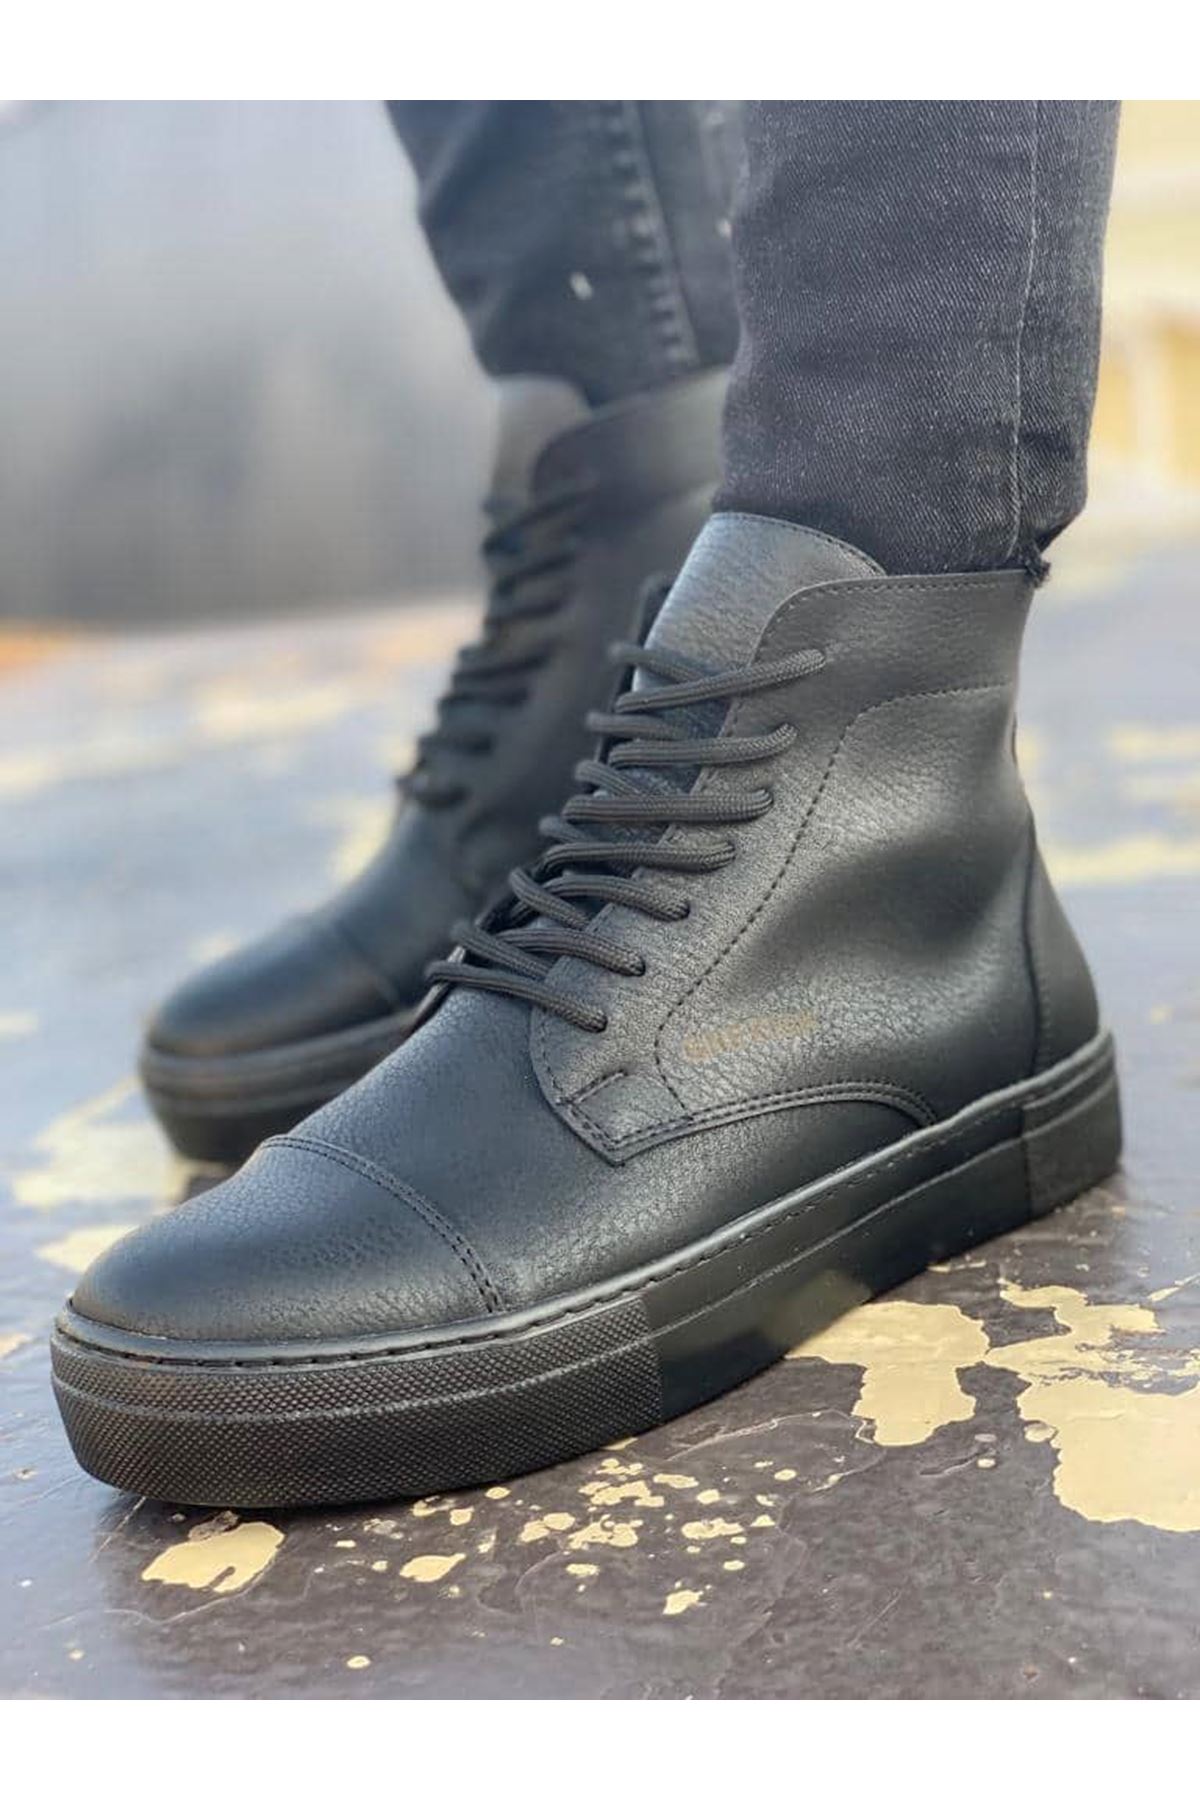 Chekich Men's Boots Full Black Artificial Leather Lace Up Closure Type 2021 Spring & Fall Sneakers Wedding Trend Footwear Solid Basic Comfortable Dark Odorless High Top Sewing Base Formal Suits Walking Running CH029